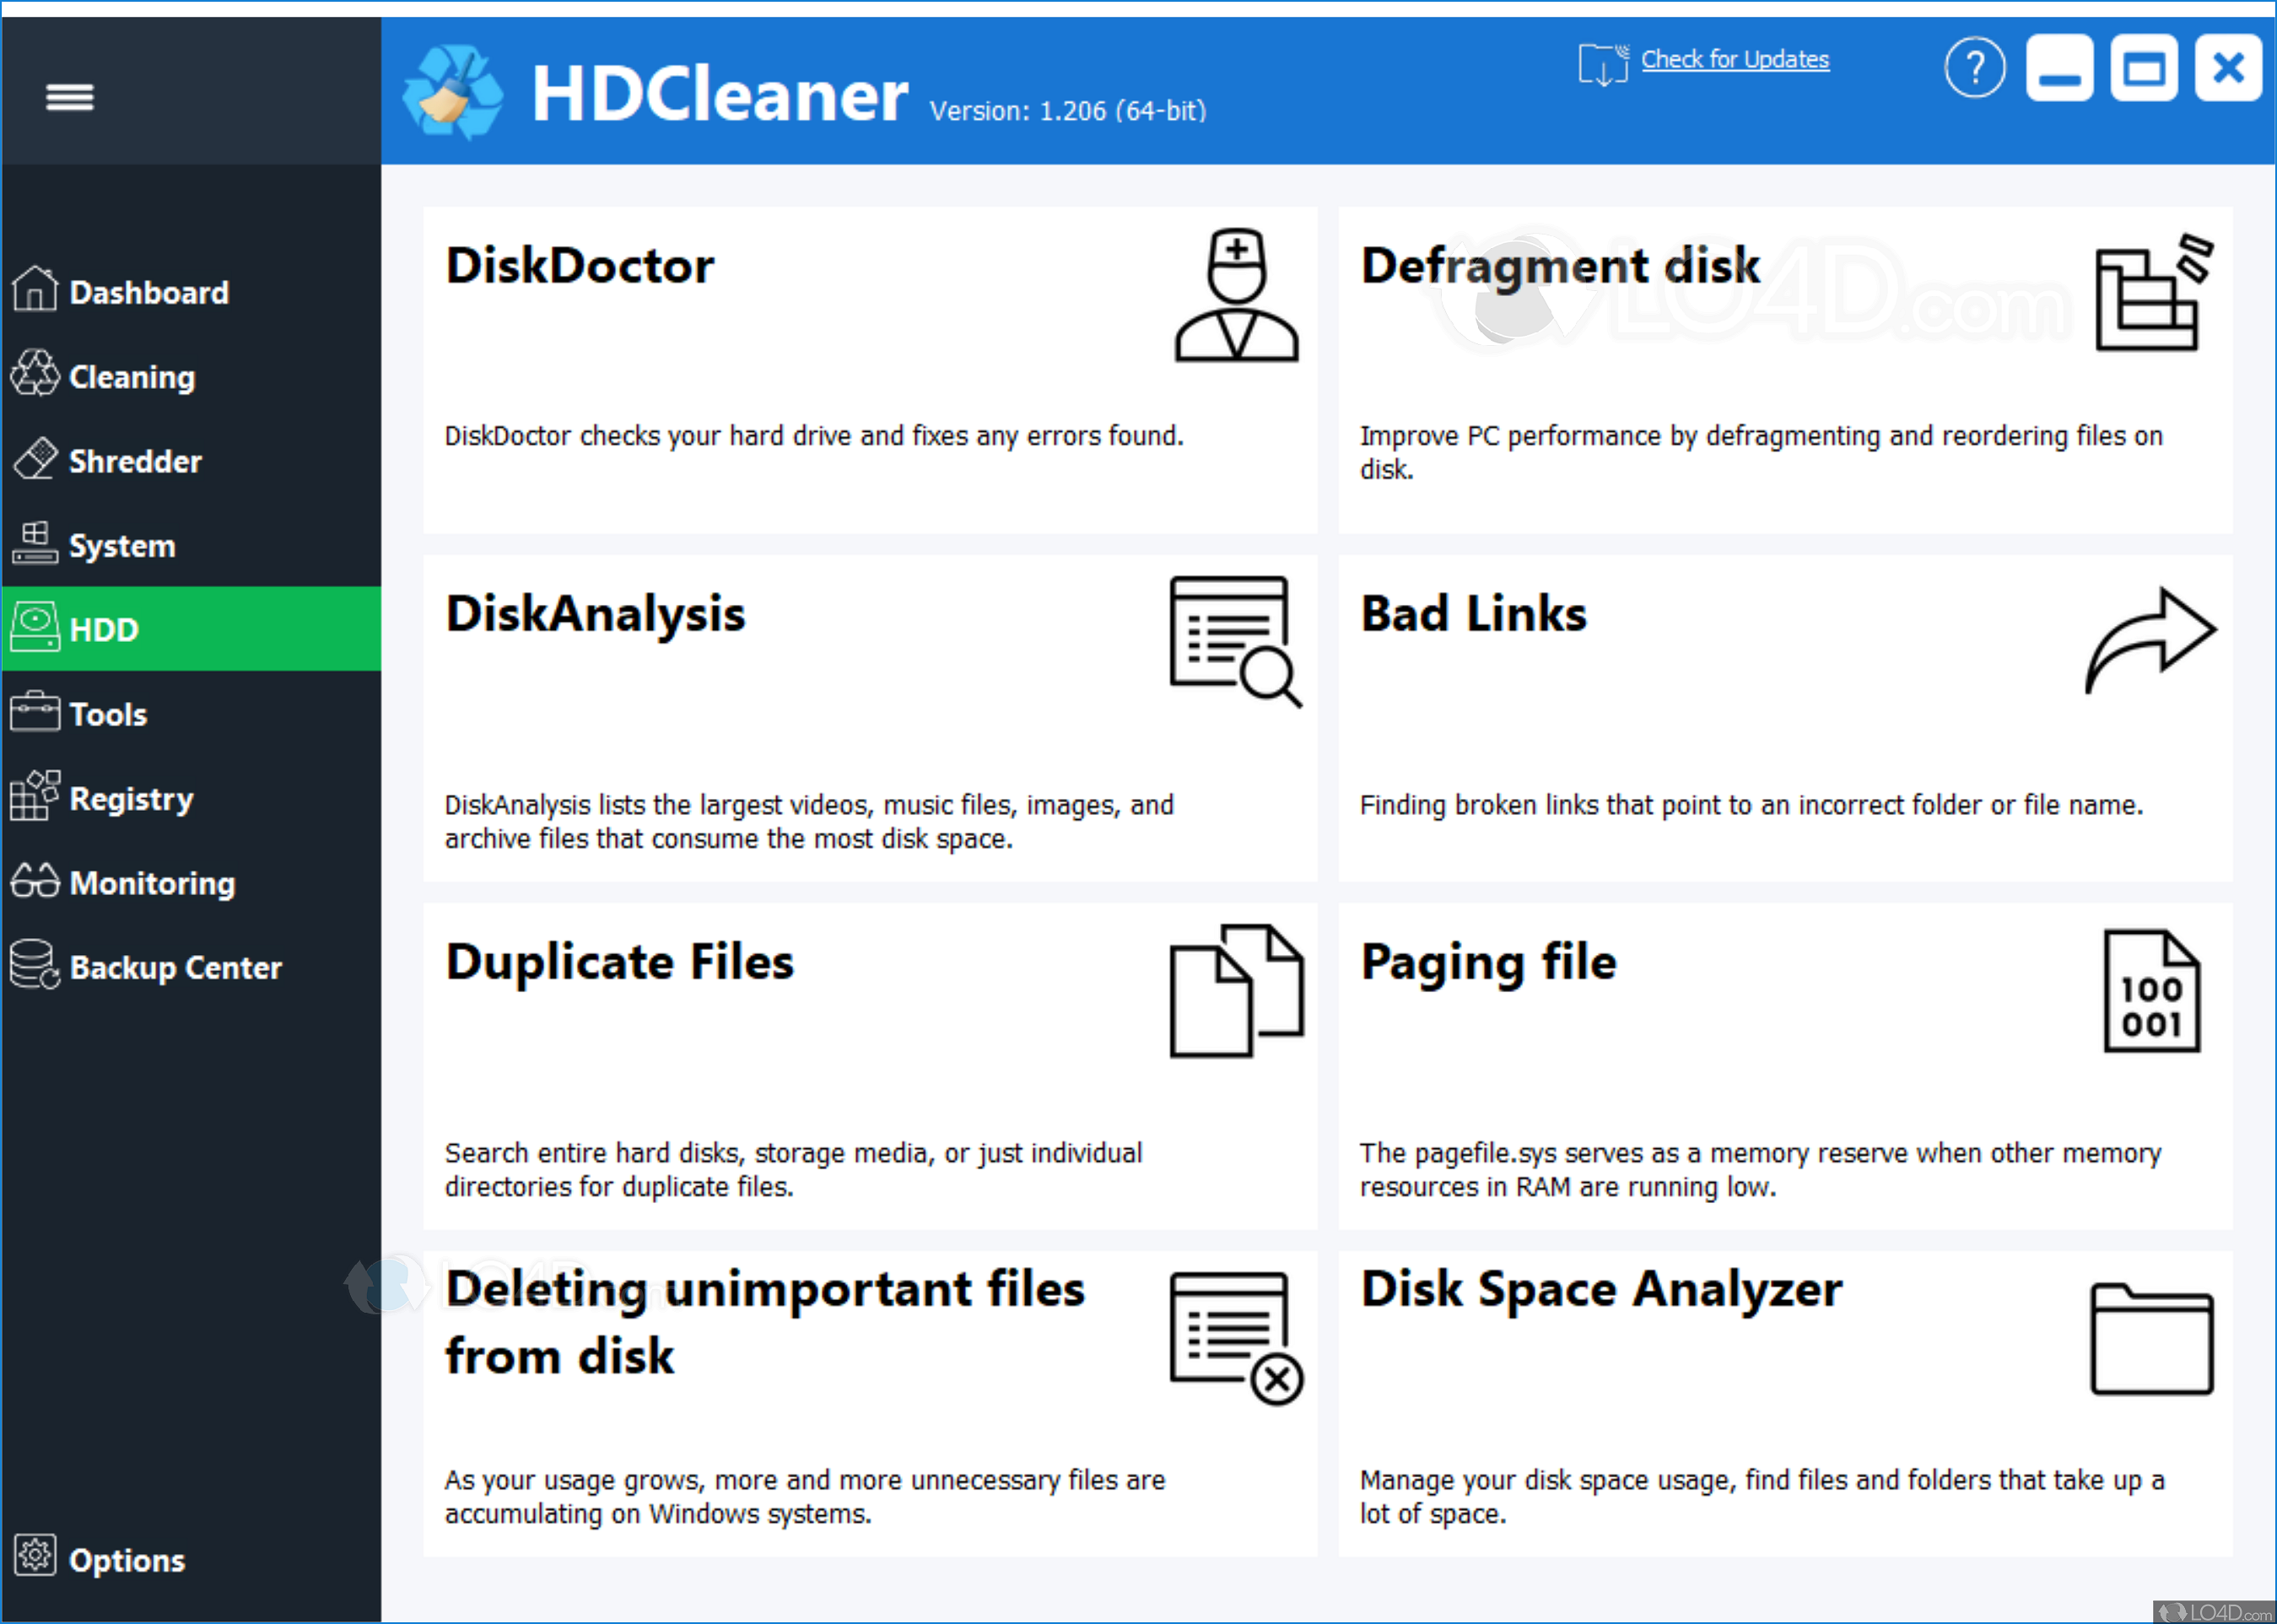 HDCleaner 2.051 free download